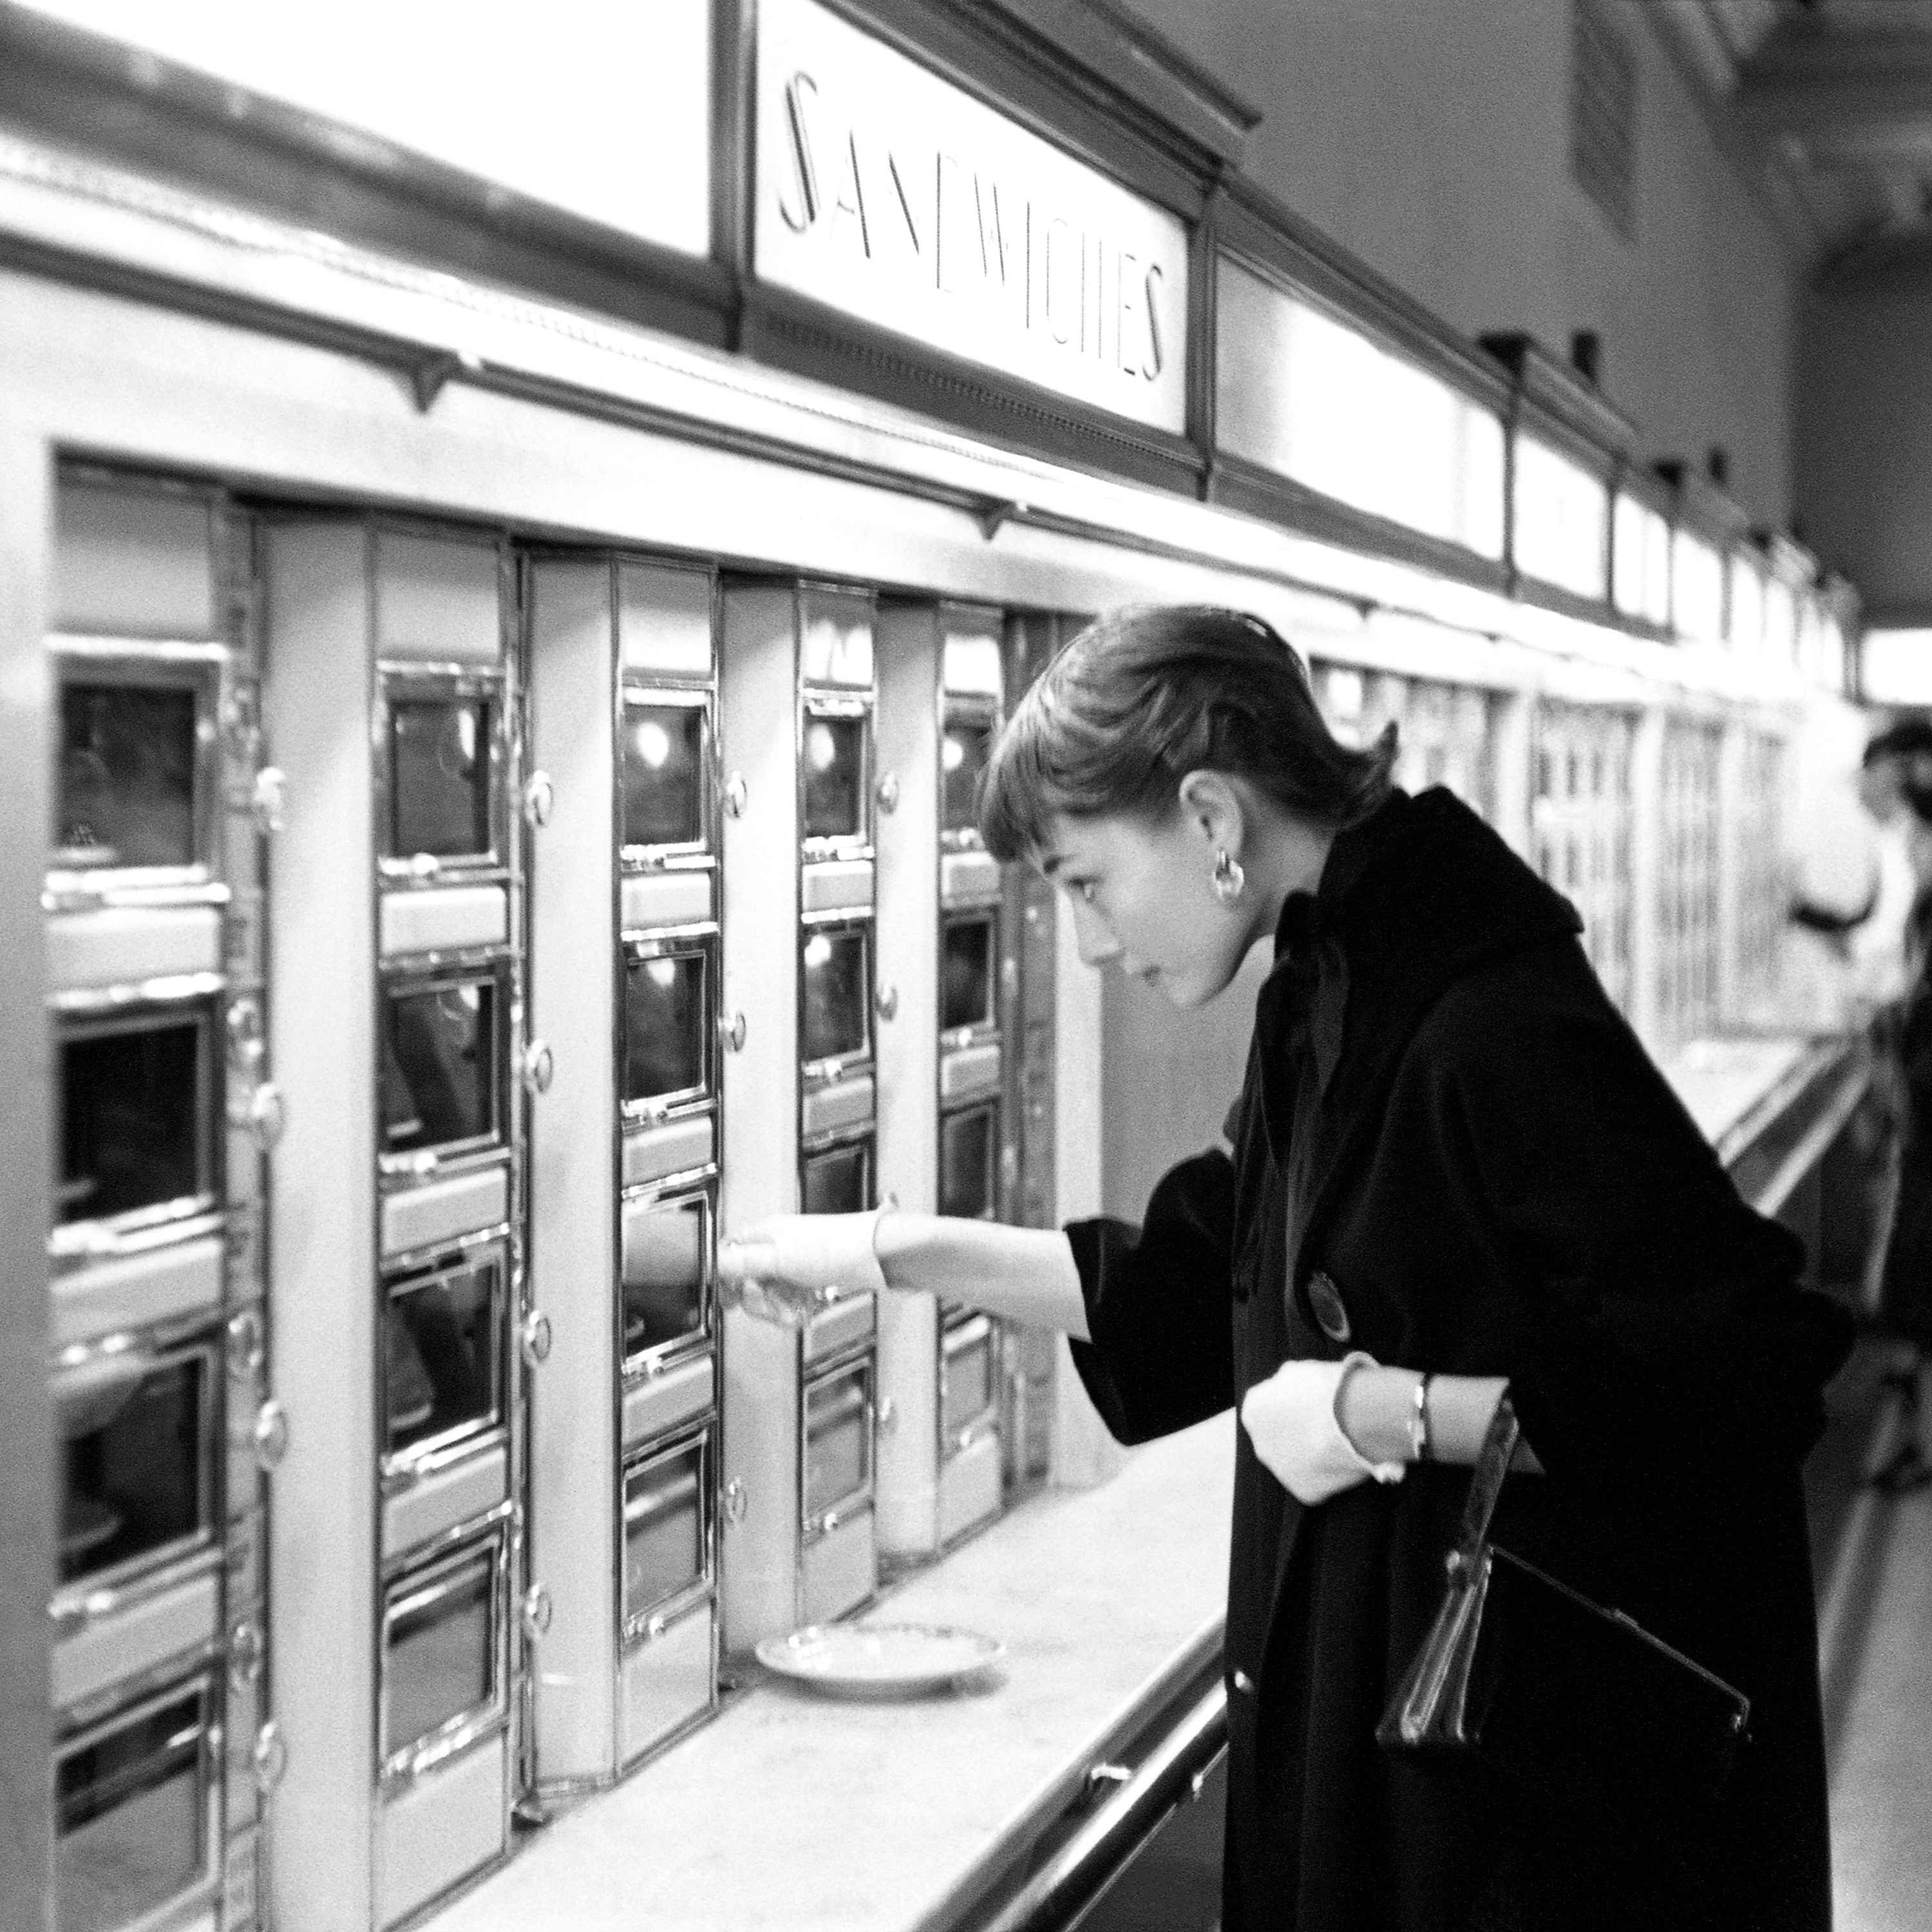 The Automat: The Amazing Story of America's Five-Cent Cafeteria